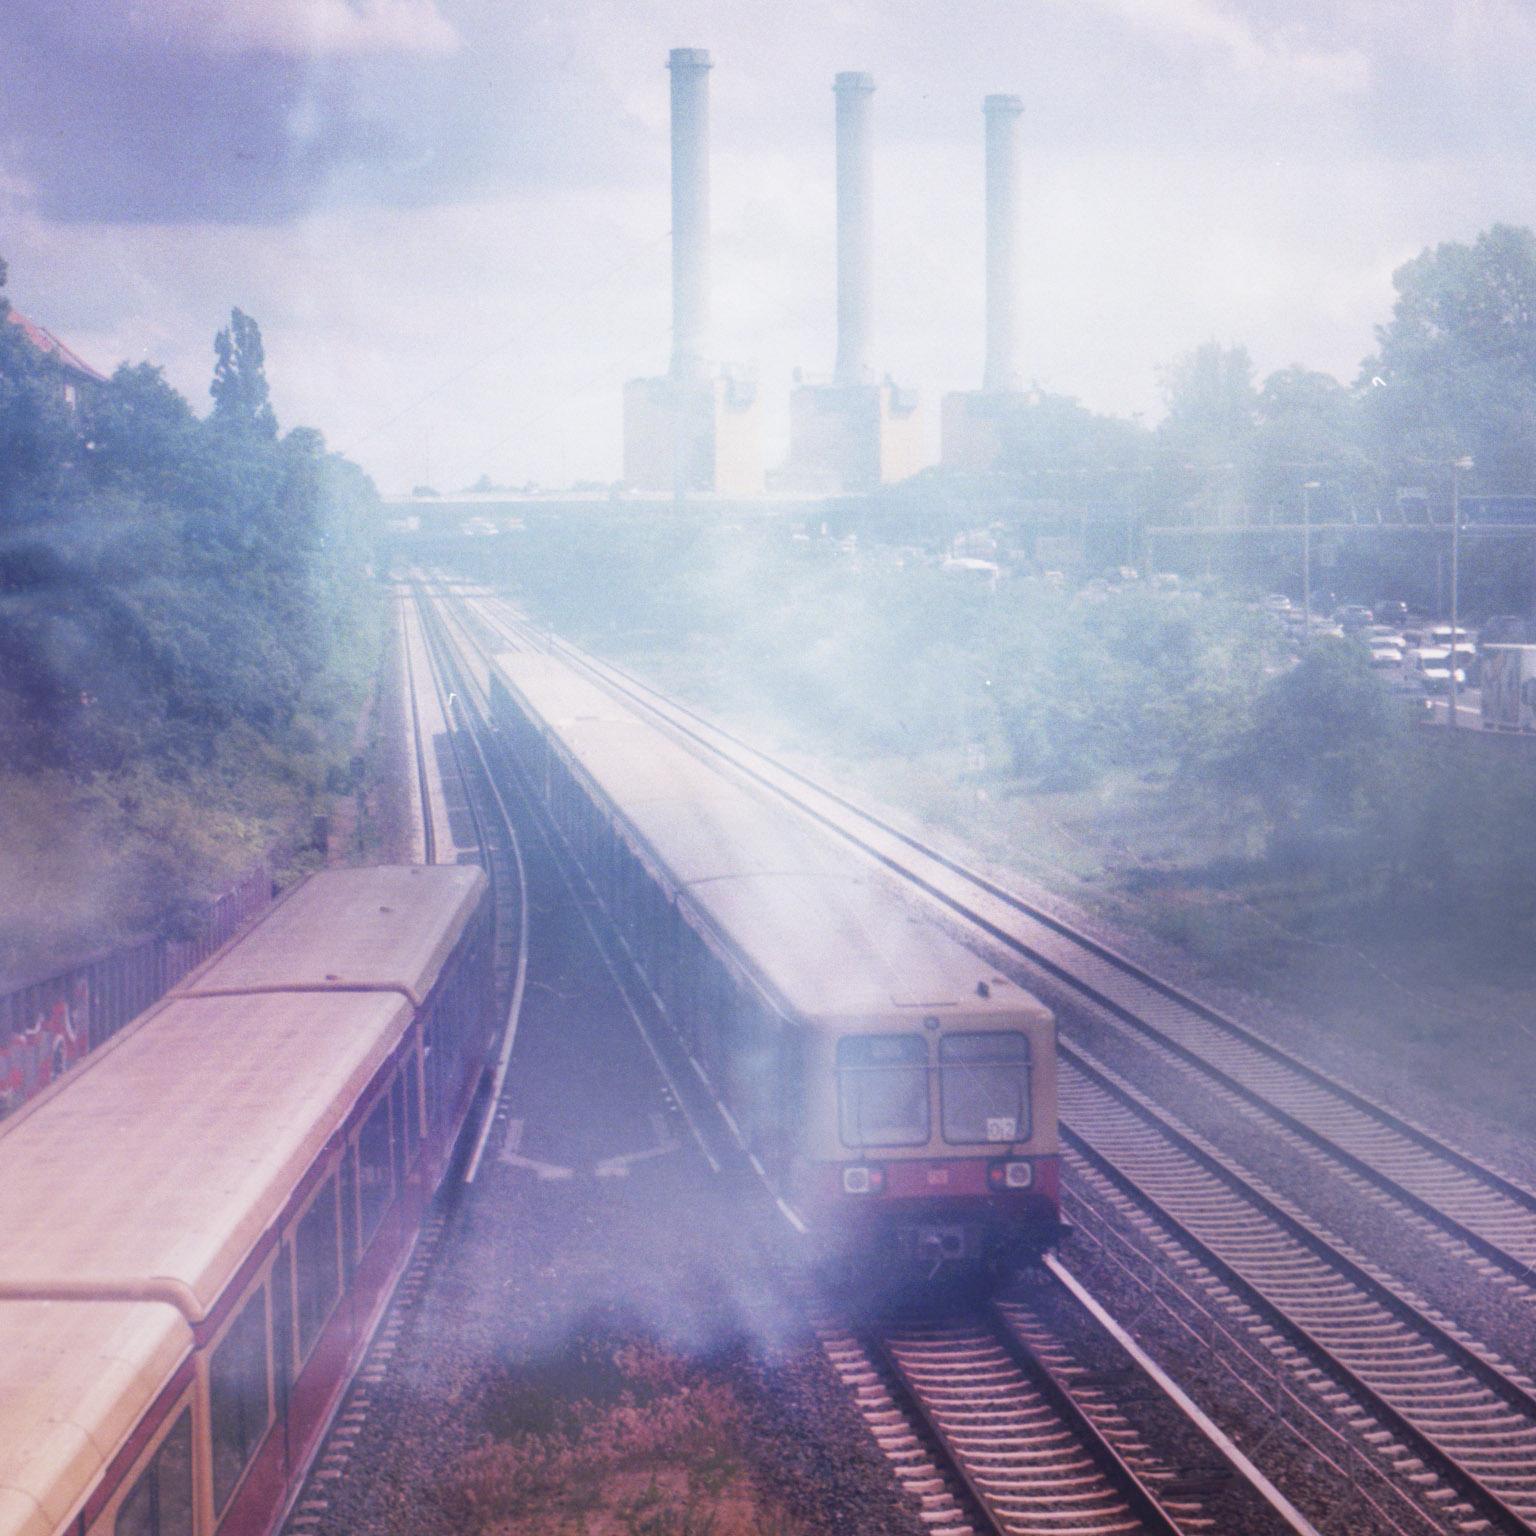 a Piece of Fading - Pieces of Berlin - Contemporary Photograph by Florian Reischauer